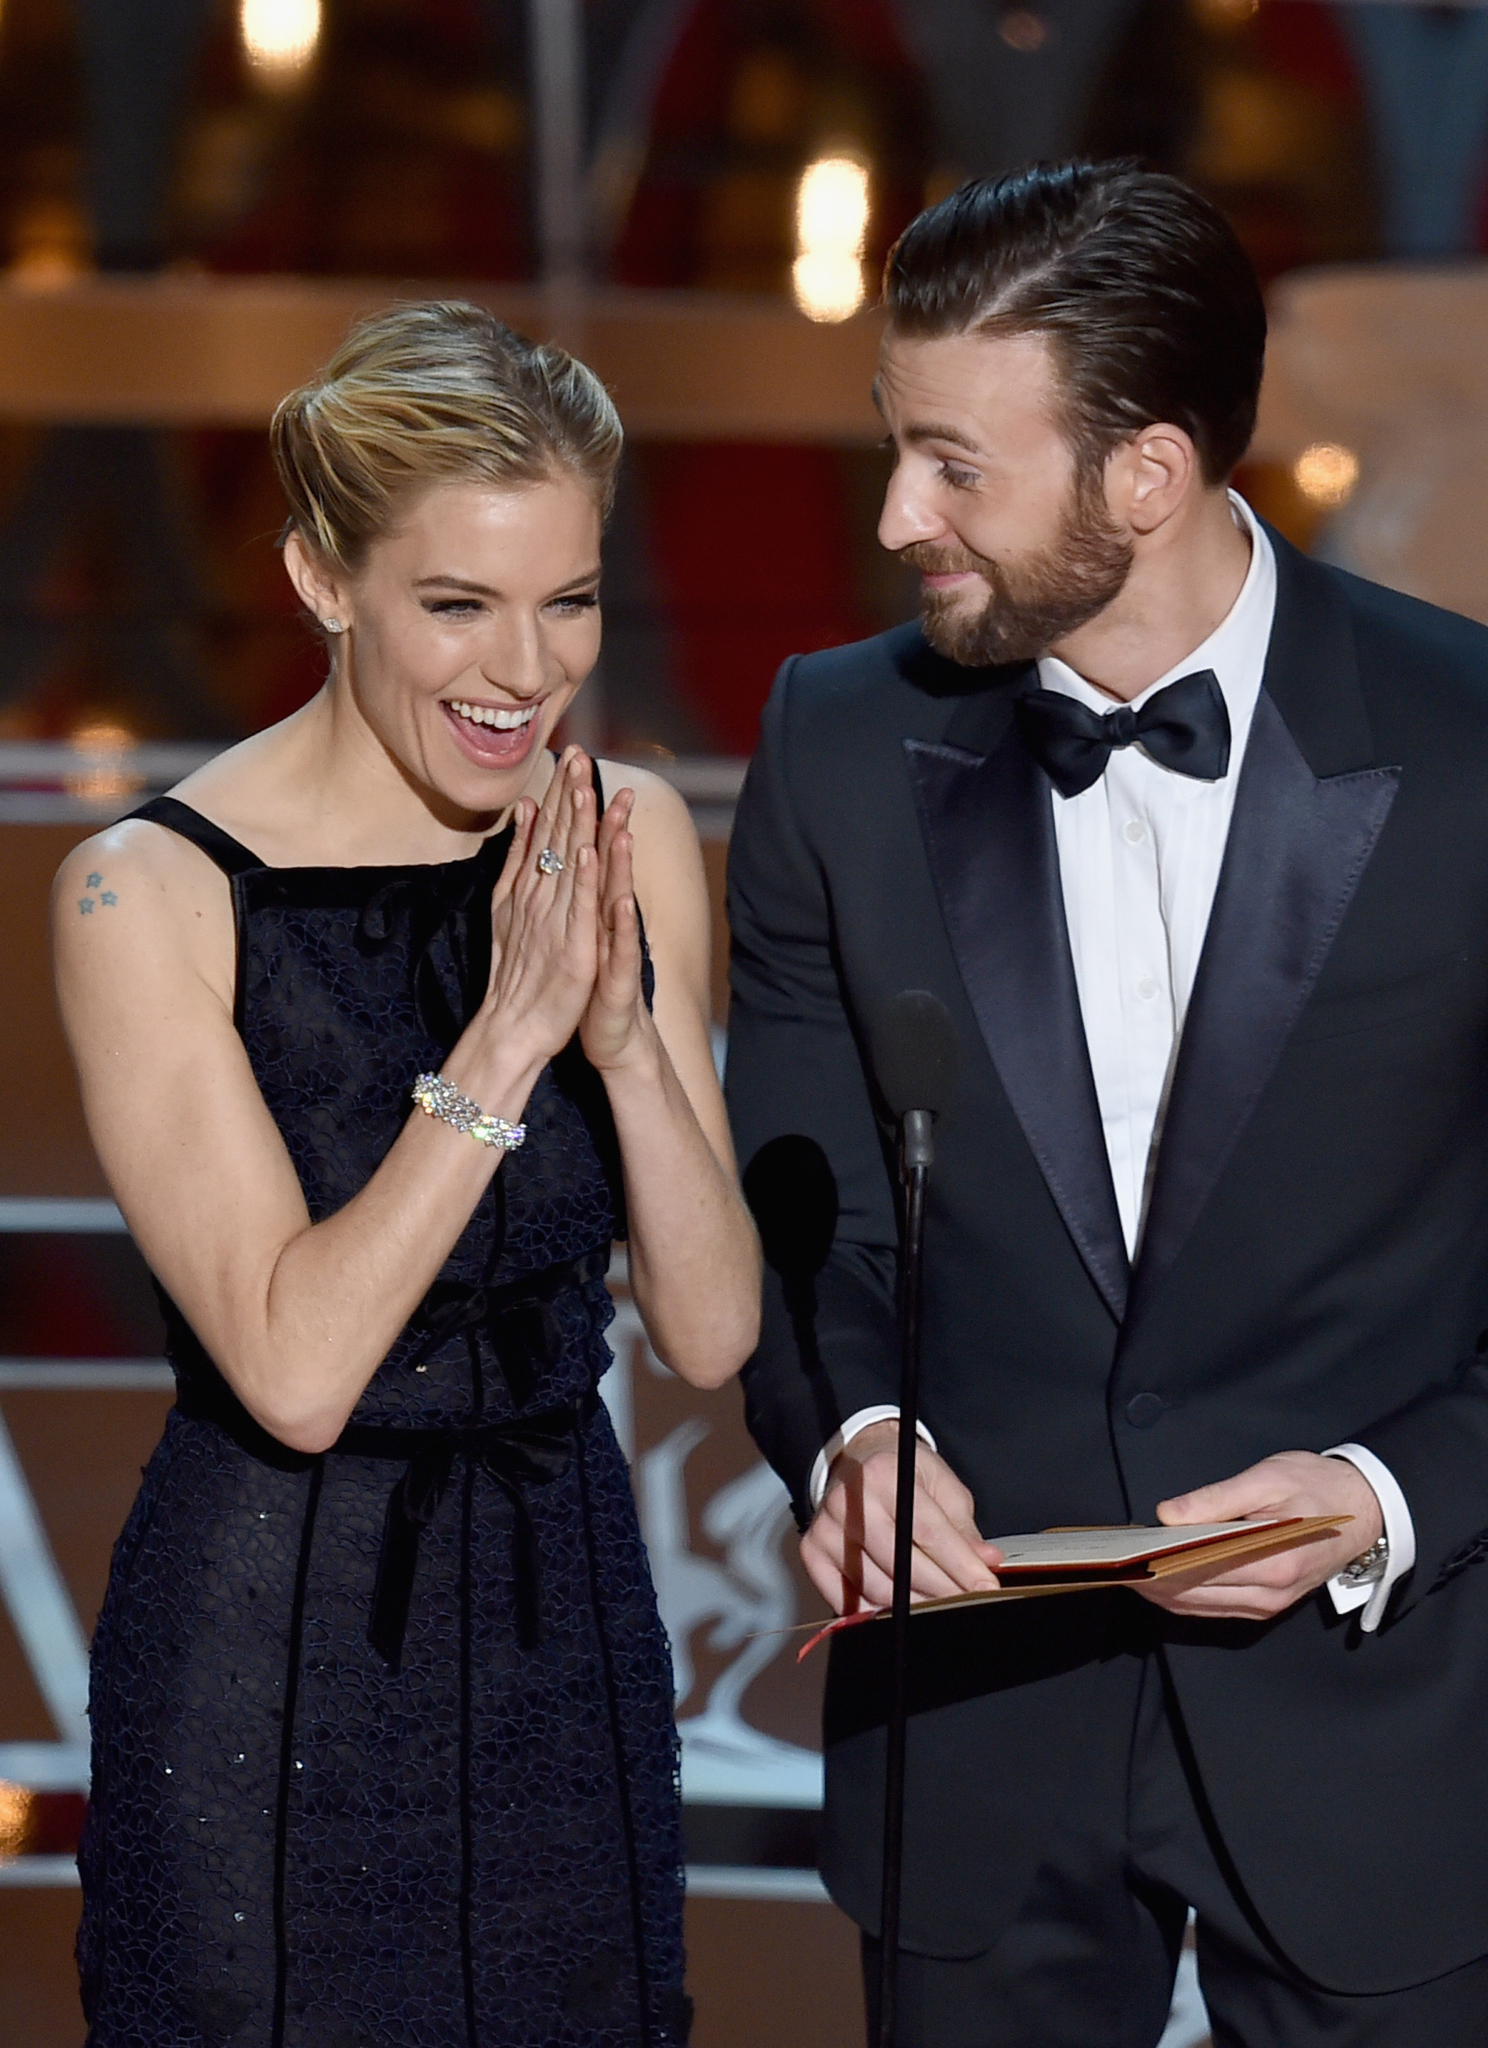 Chris Evans and Sienna Miller at event of The Oscars (2015)